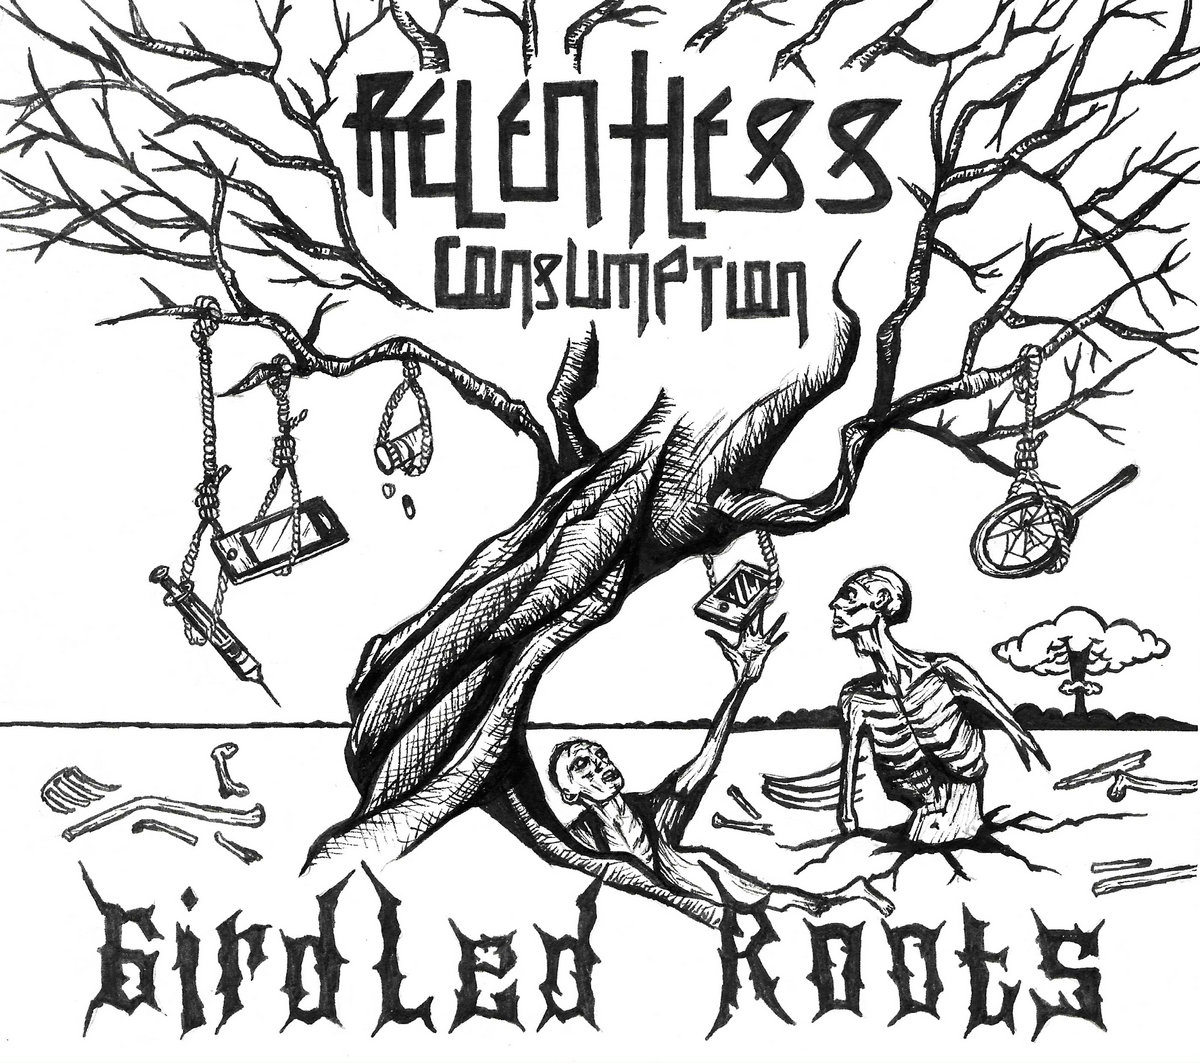 Relentless Consumption - "Girdled Roots" EP - 2023